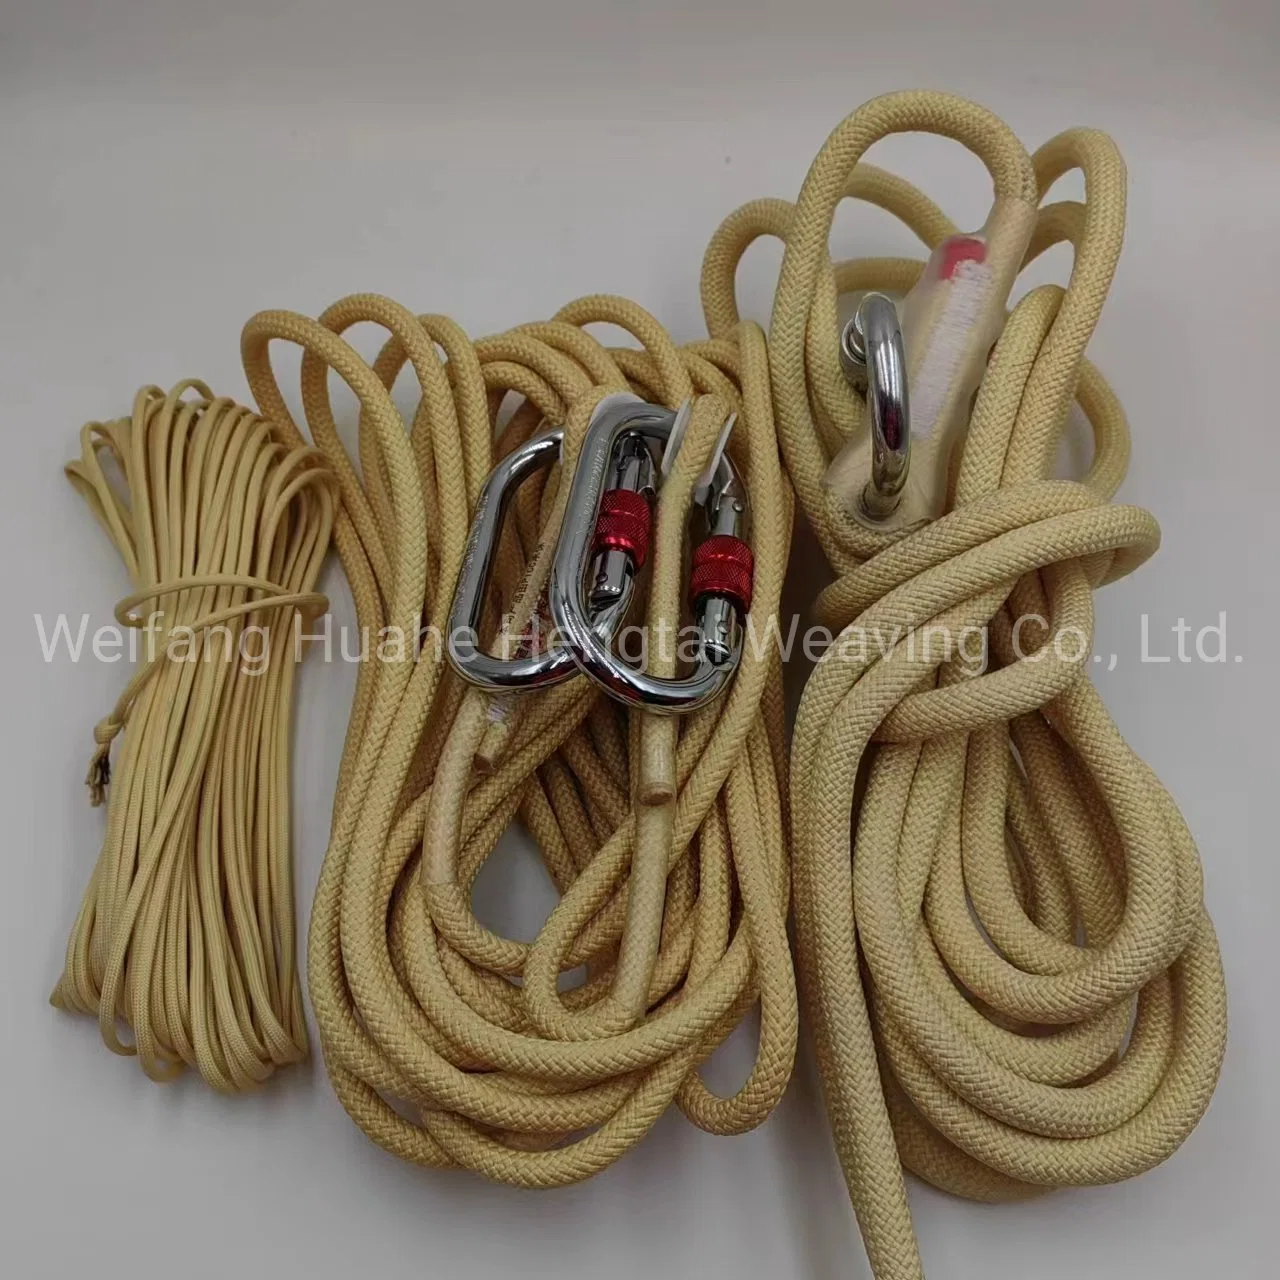 Wear-Resistant, High-Temperature Resistant, Flame-Retardant and Fireproof Kevlar Fire Rope